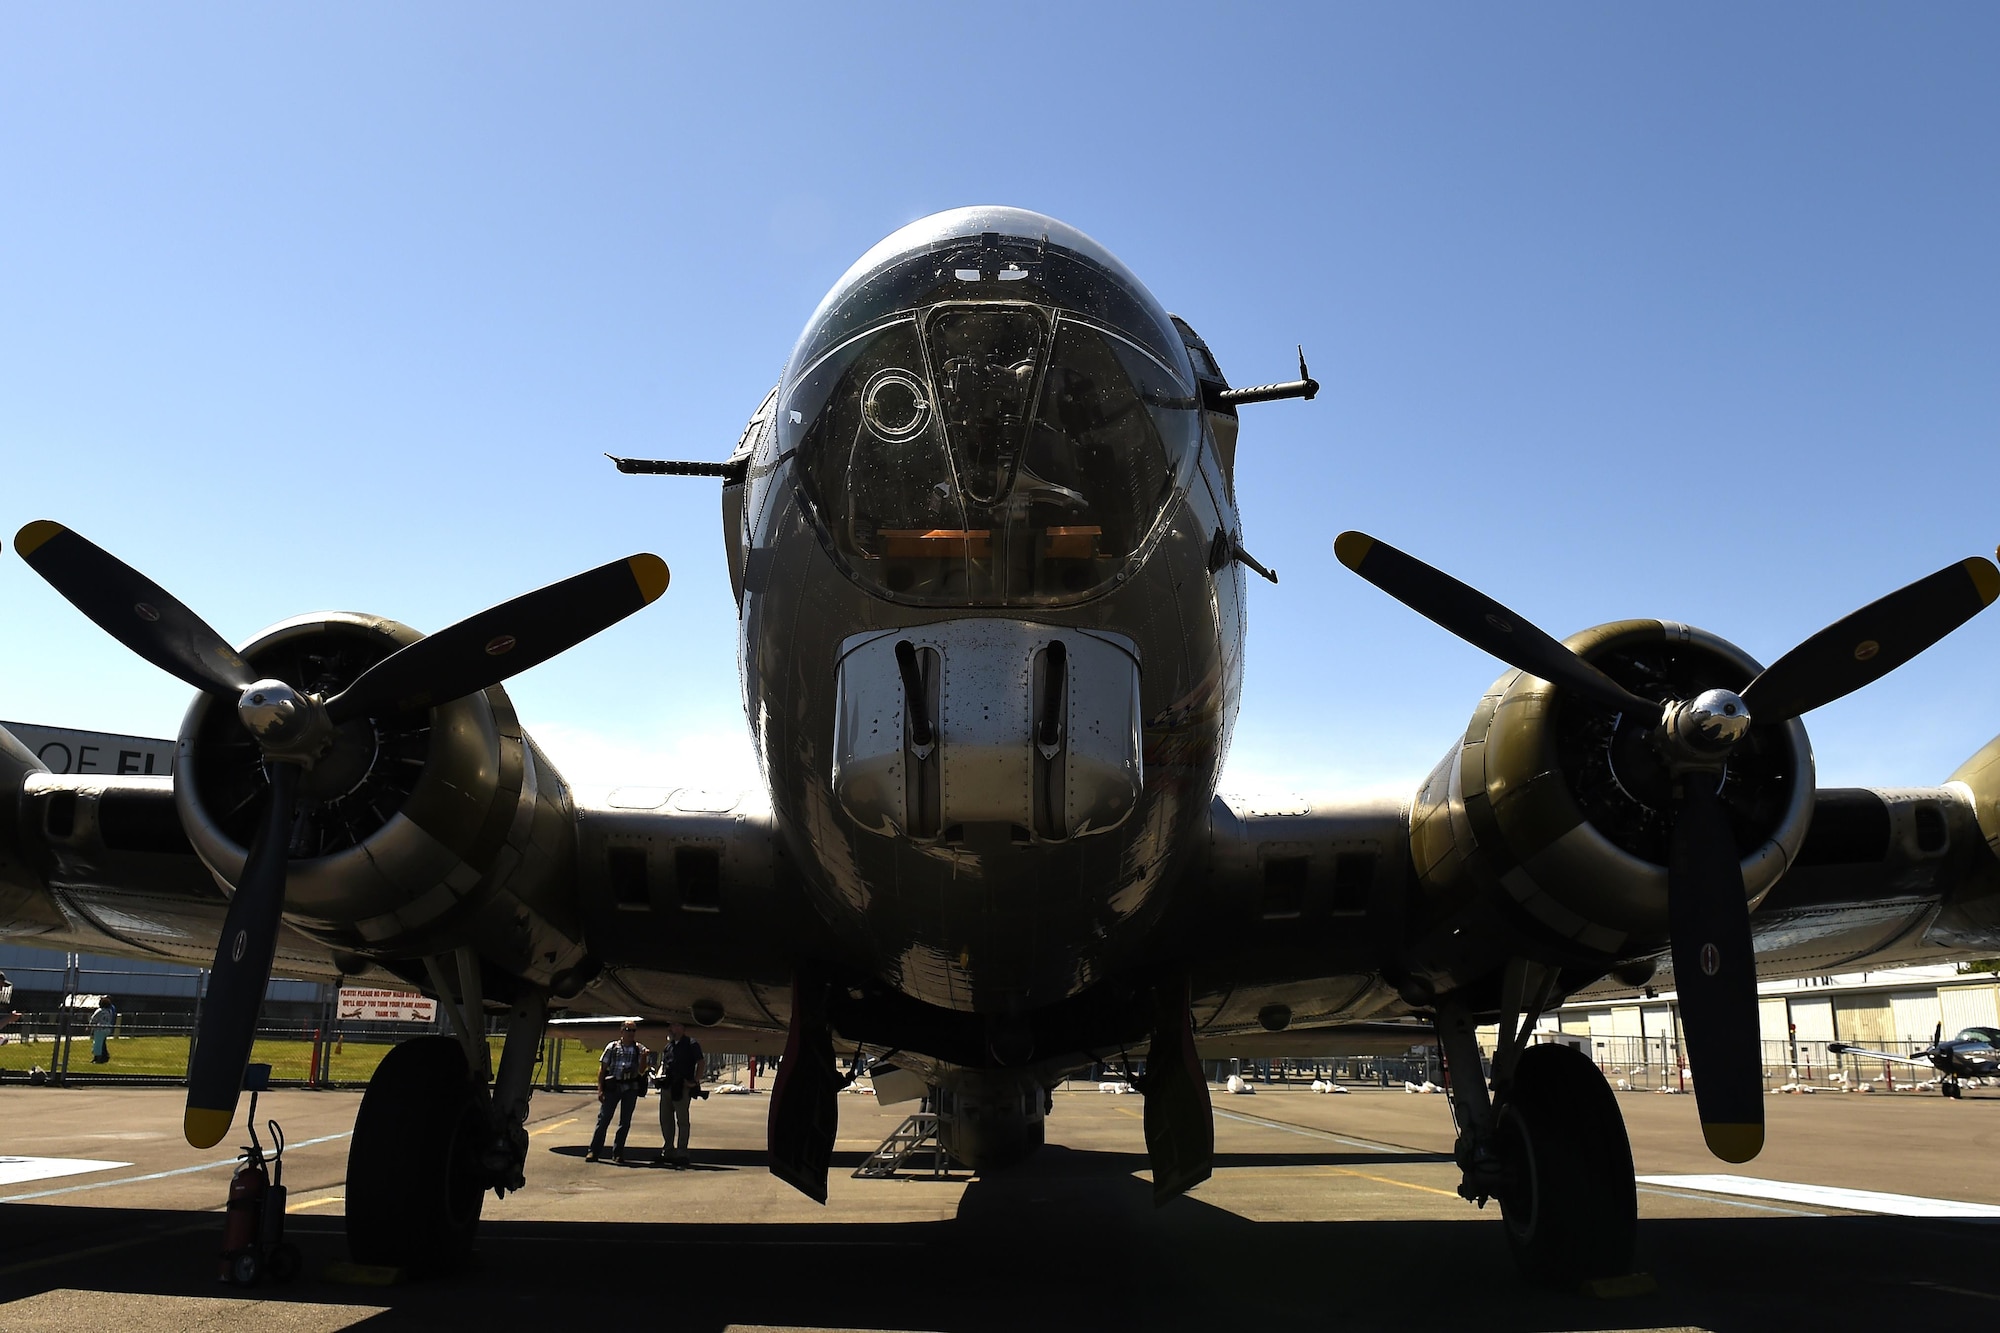 A B-17 Flying Fortress is parked on the ramp at the Museum of Flight in Seattle, Wash., June 6, 2016. This B-17 was restored by the Experimental Aircraft Association and was brought to Seattle to make it available for public flights throughout the summer. (U.S Air Force photo/ Tech. Sgt. Tim Chacon)